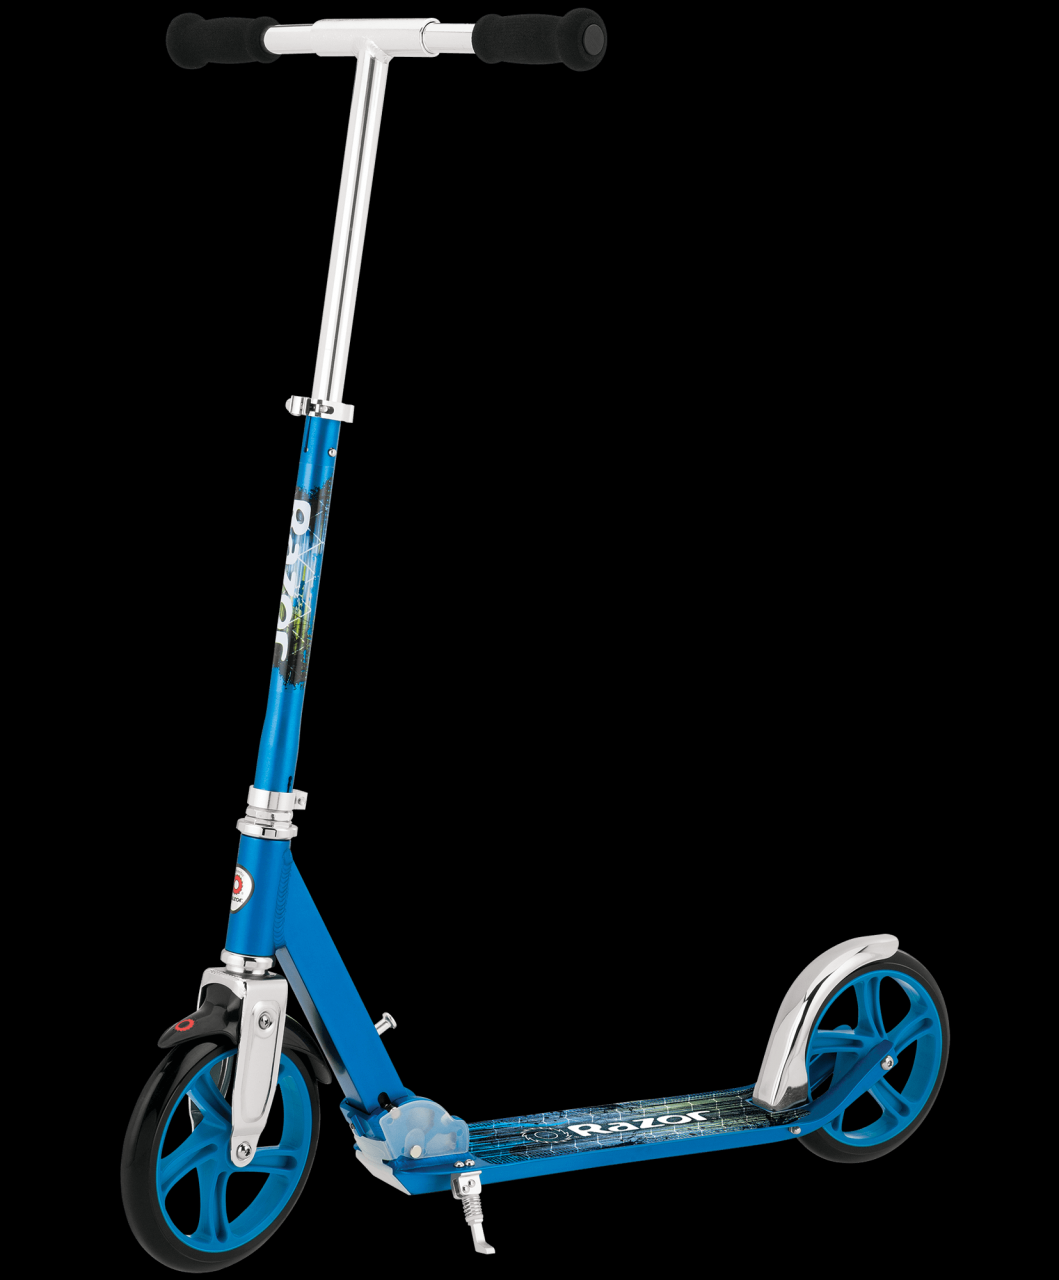 A5 Lux Scooter - Razor